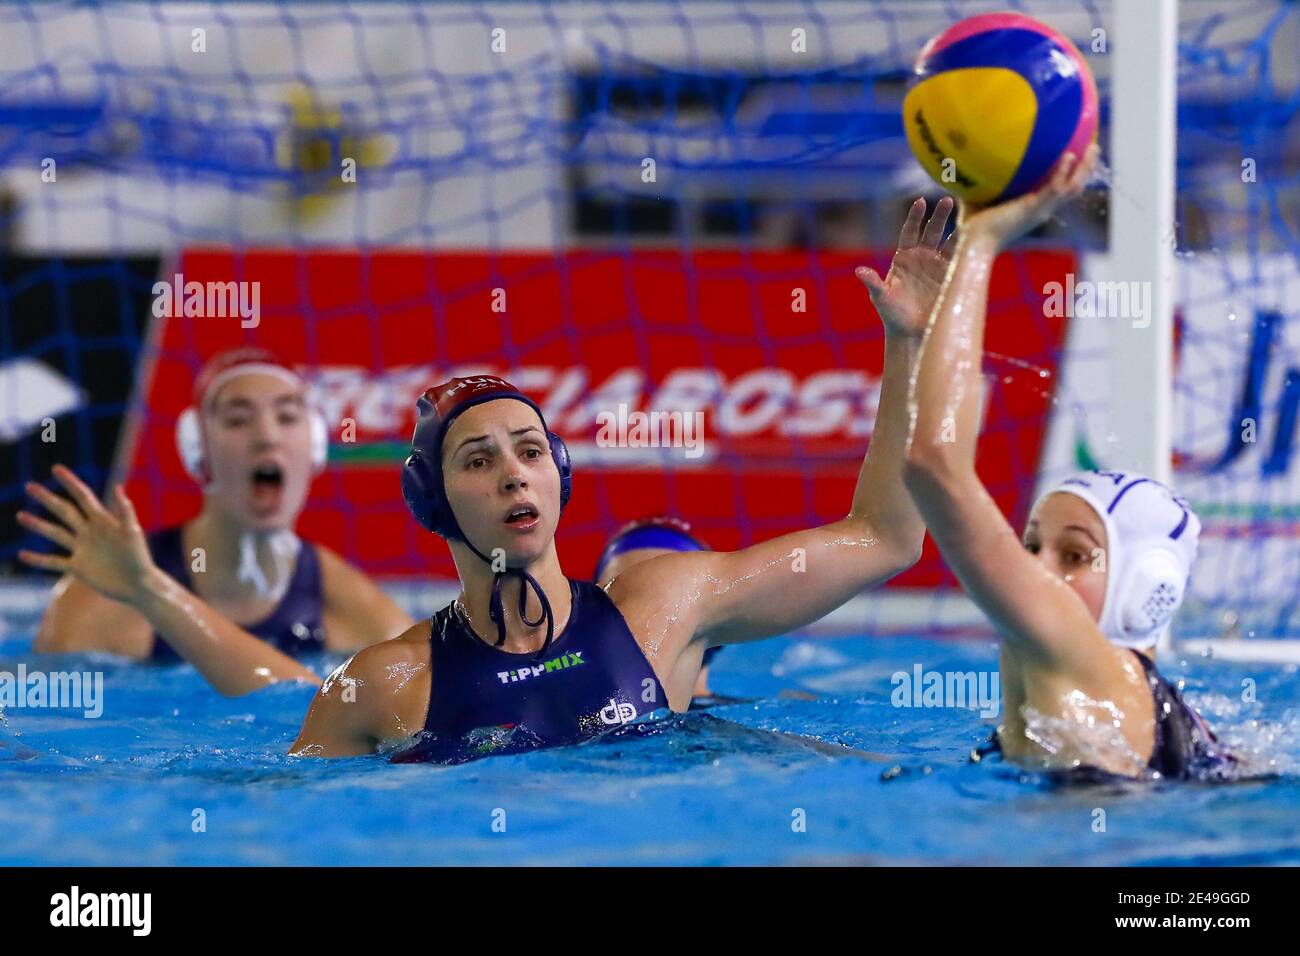 TRIESTE, ITALY - JANUARY 22: Rita Keszthelyi of Hungary, Juliette Marie Dhalluin of France during the match between France and Hungary at Women's Wate Stock Photo